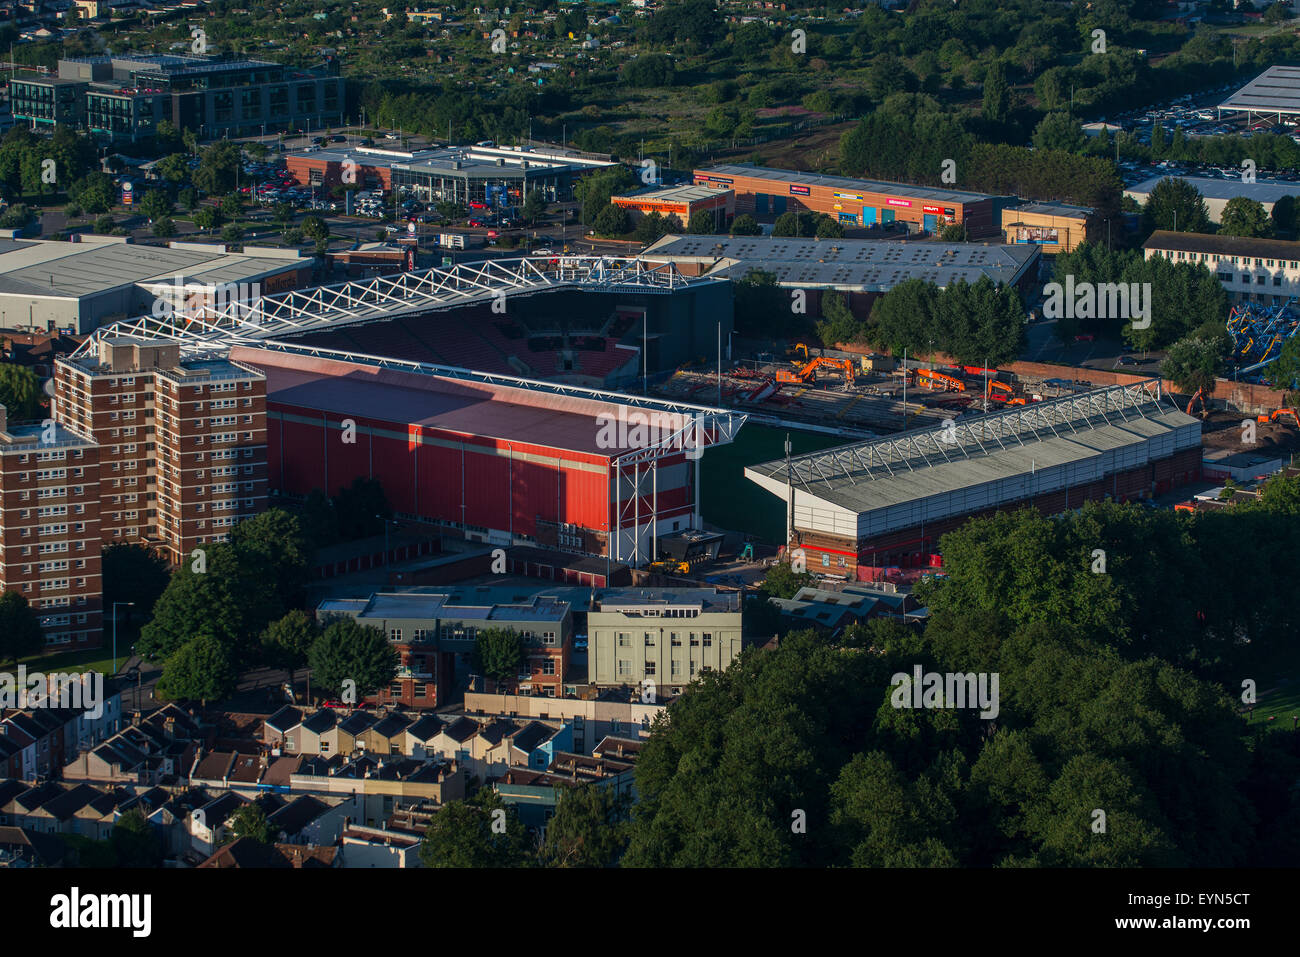 An Aerial view of Ashton Gate Stadium the home ground of Bristol City Football Club and Bristol Rugby Club. Stock Photo